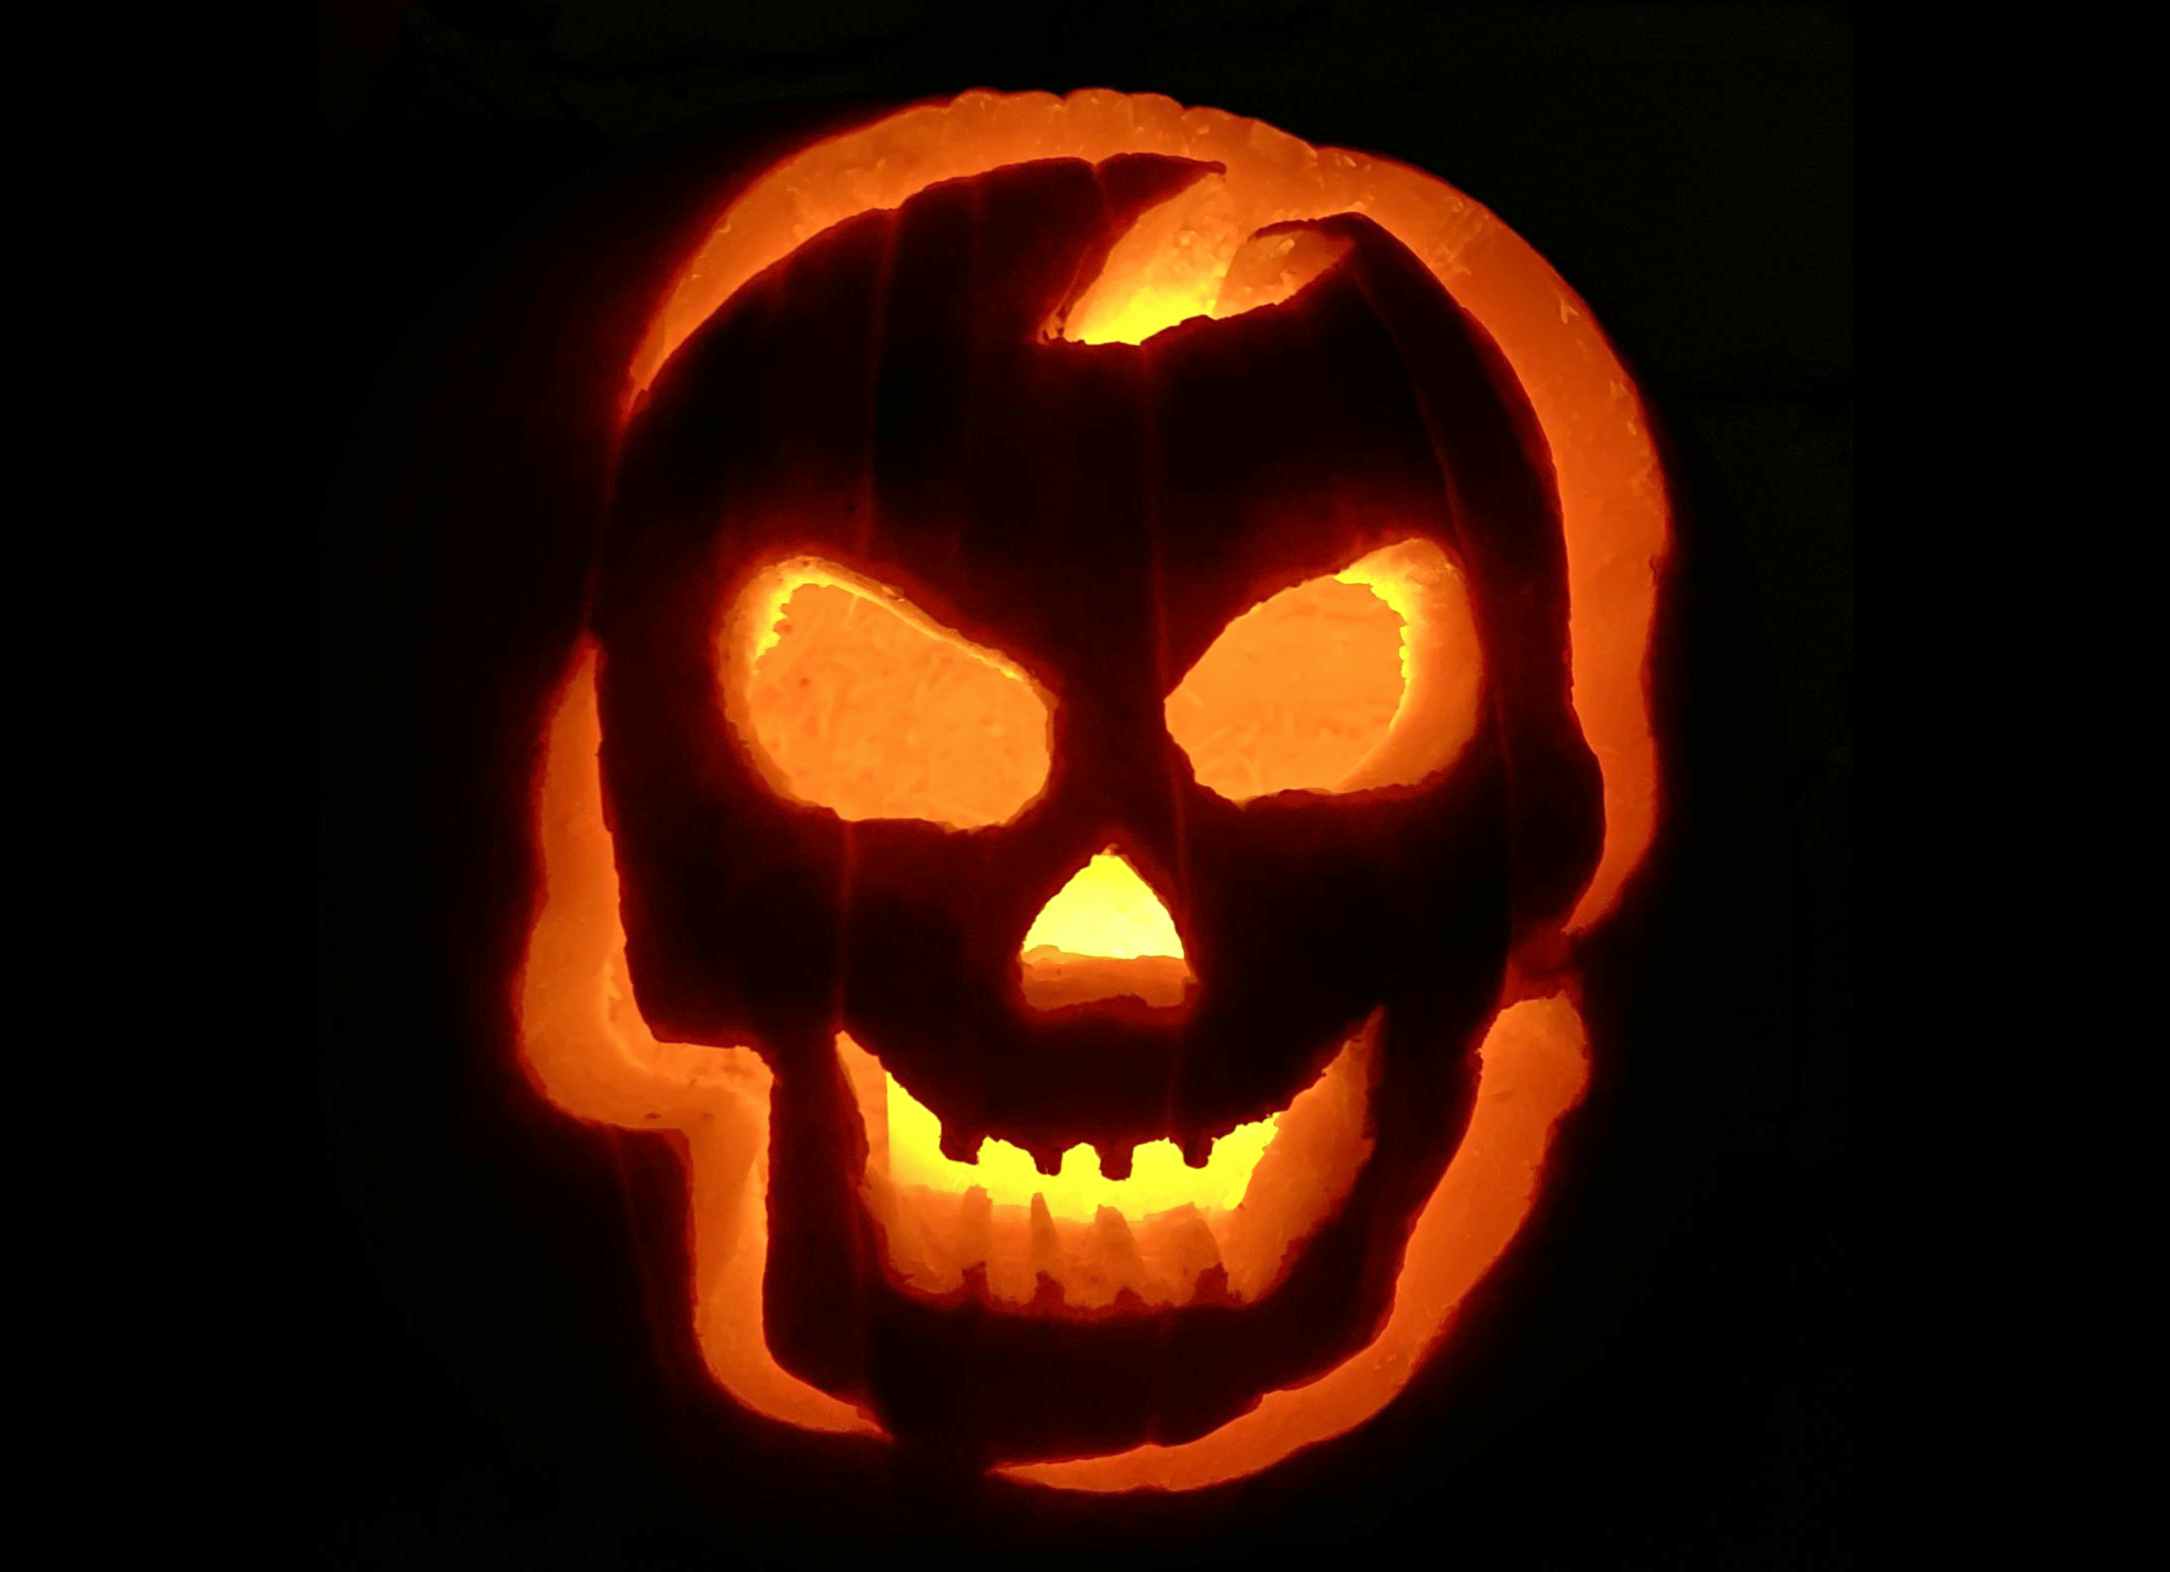 Pumpkin carved with a skull on the front.